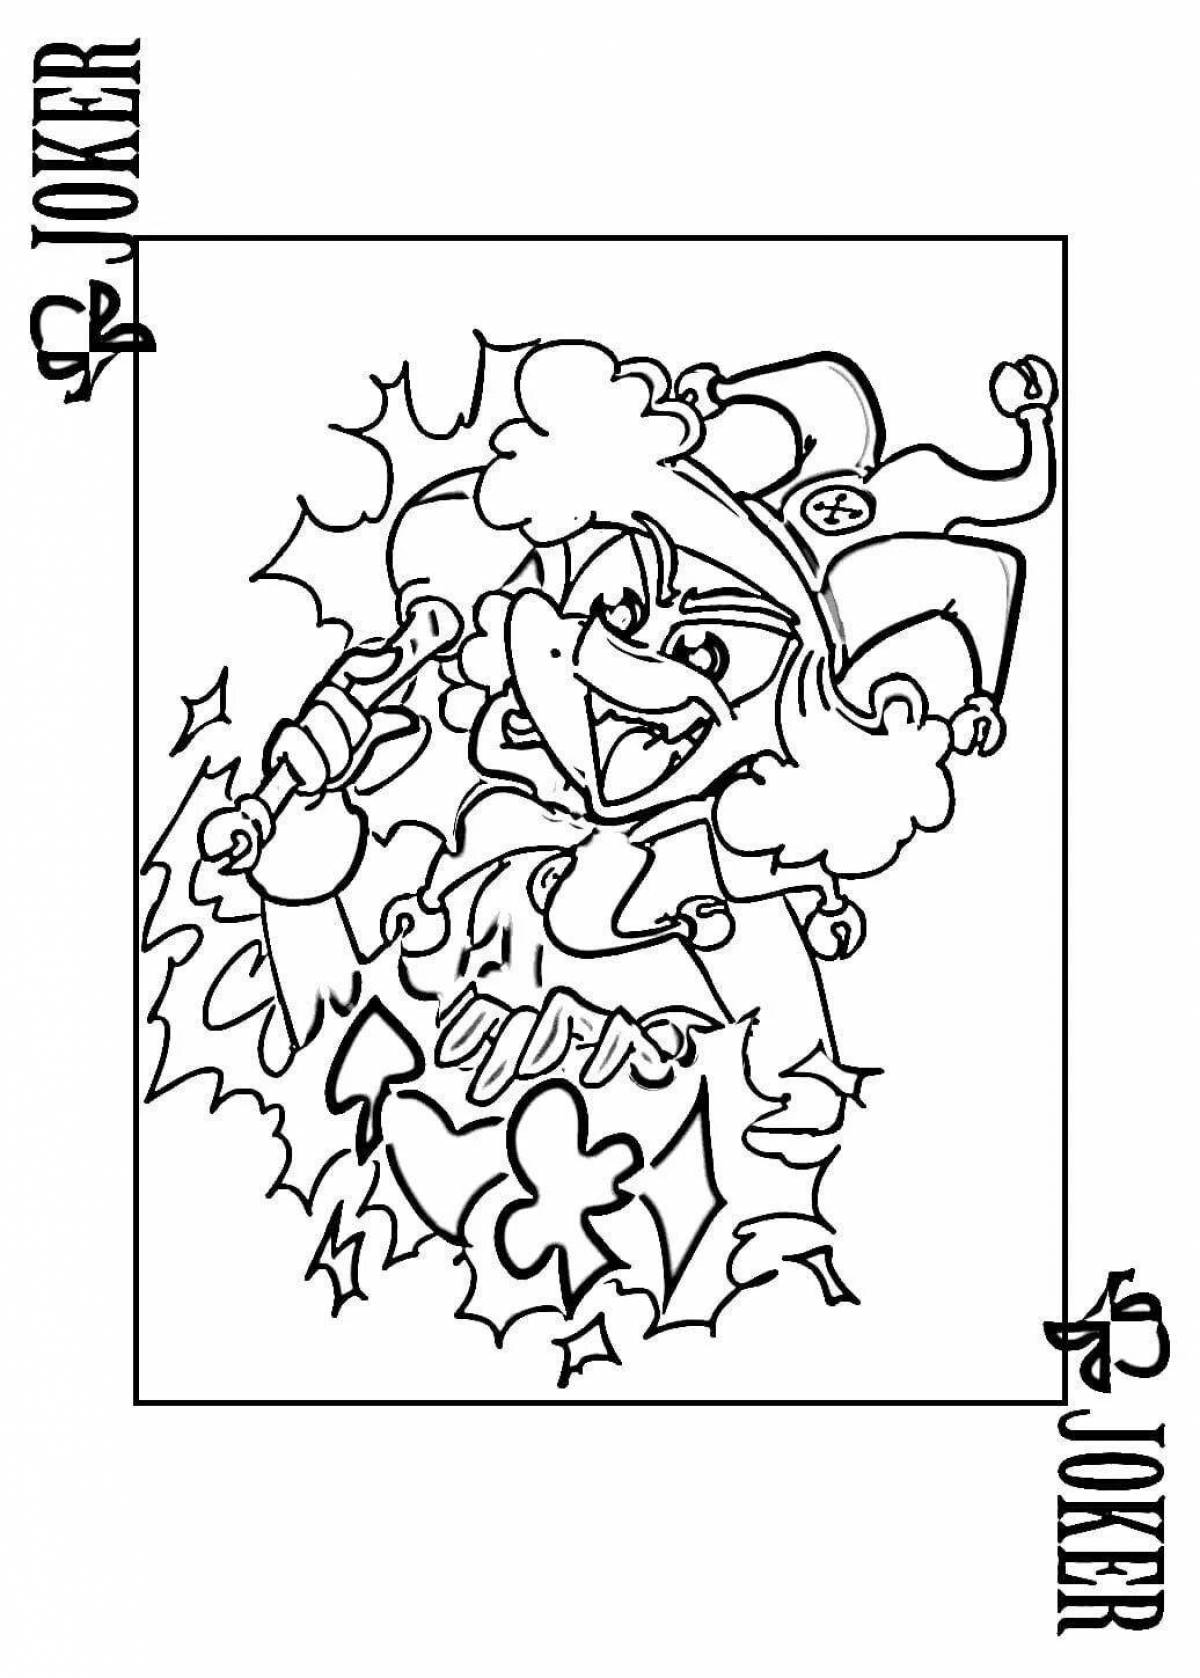 Colorful comic 13 coloring cards